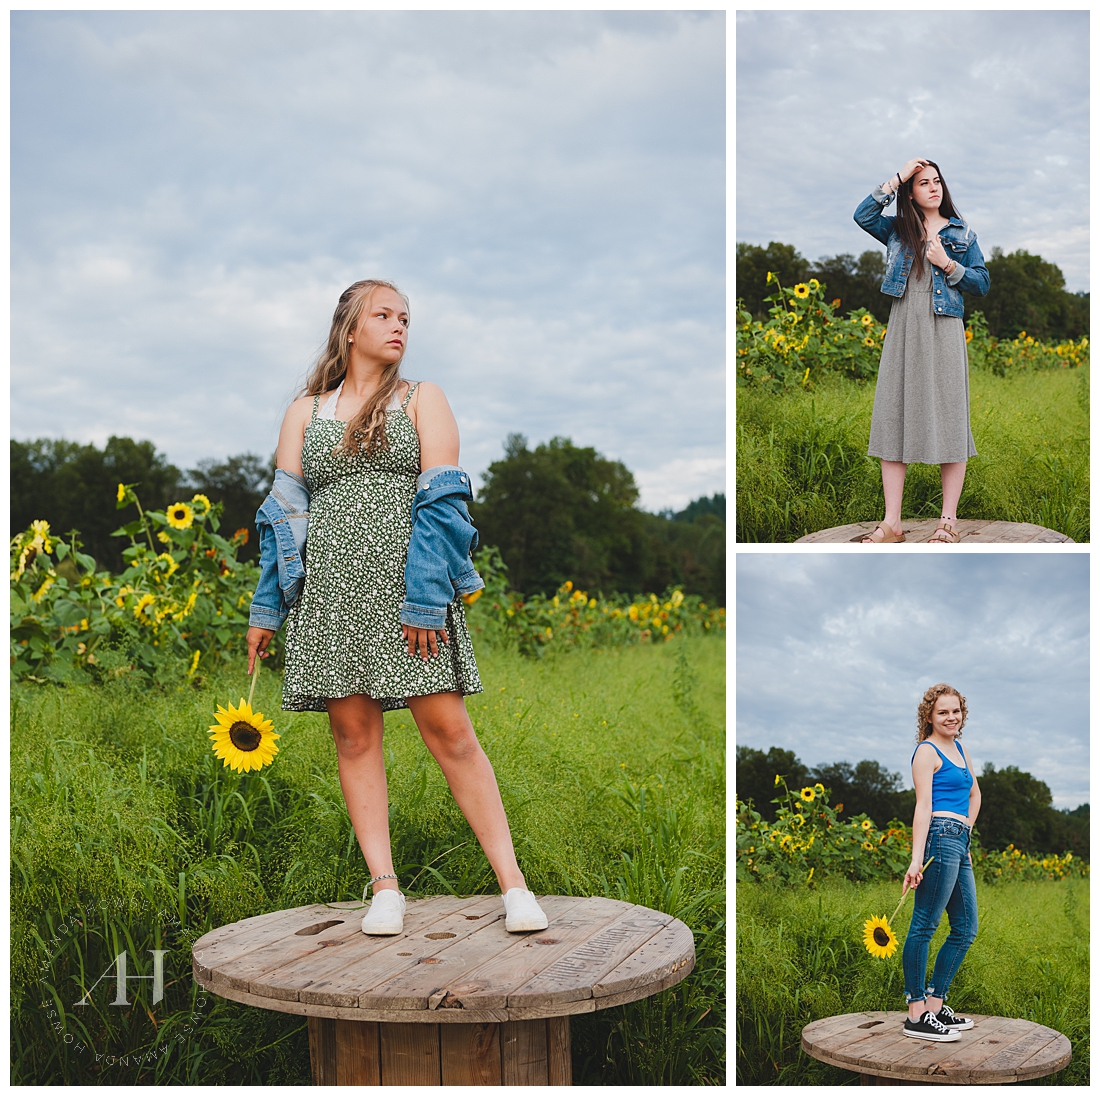 High School Senior Girls Posing on Wooden Wheel in Sunflower Field | Photographed by the Best Tacoma Senior Photographer Amanda Howse